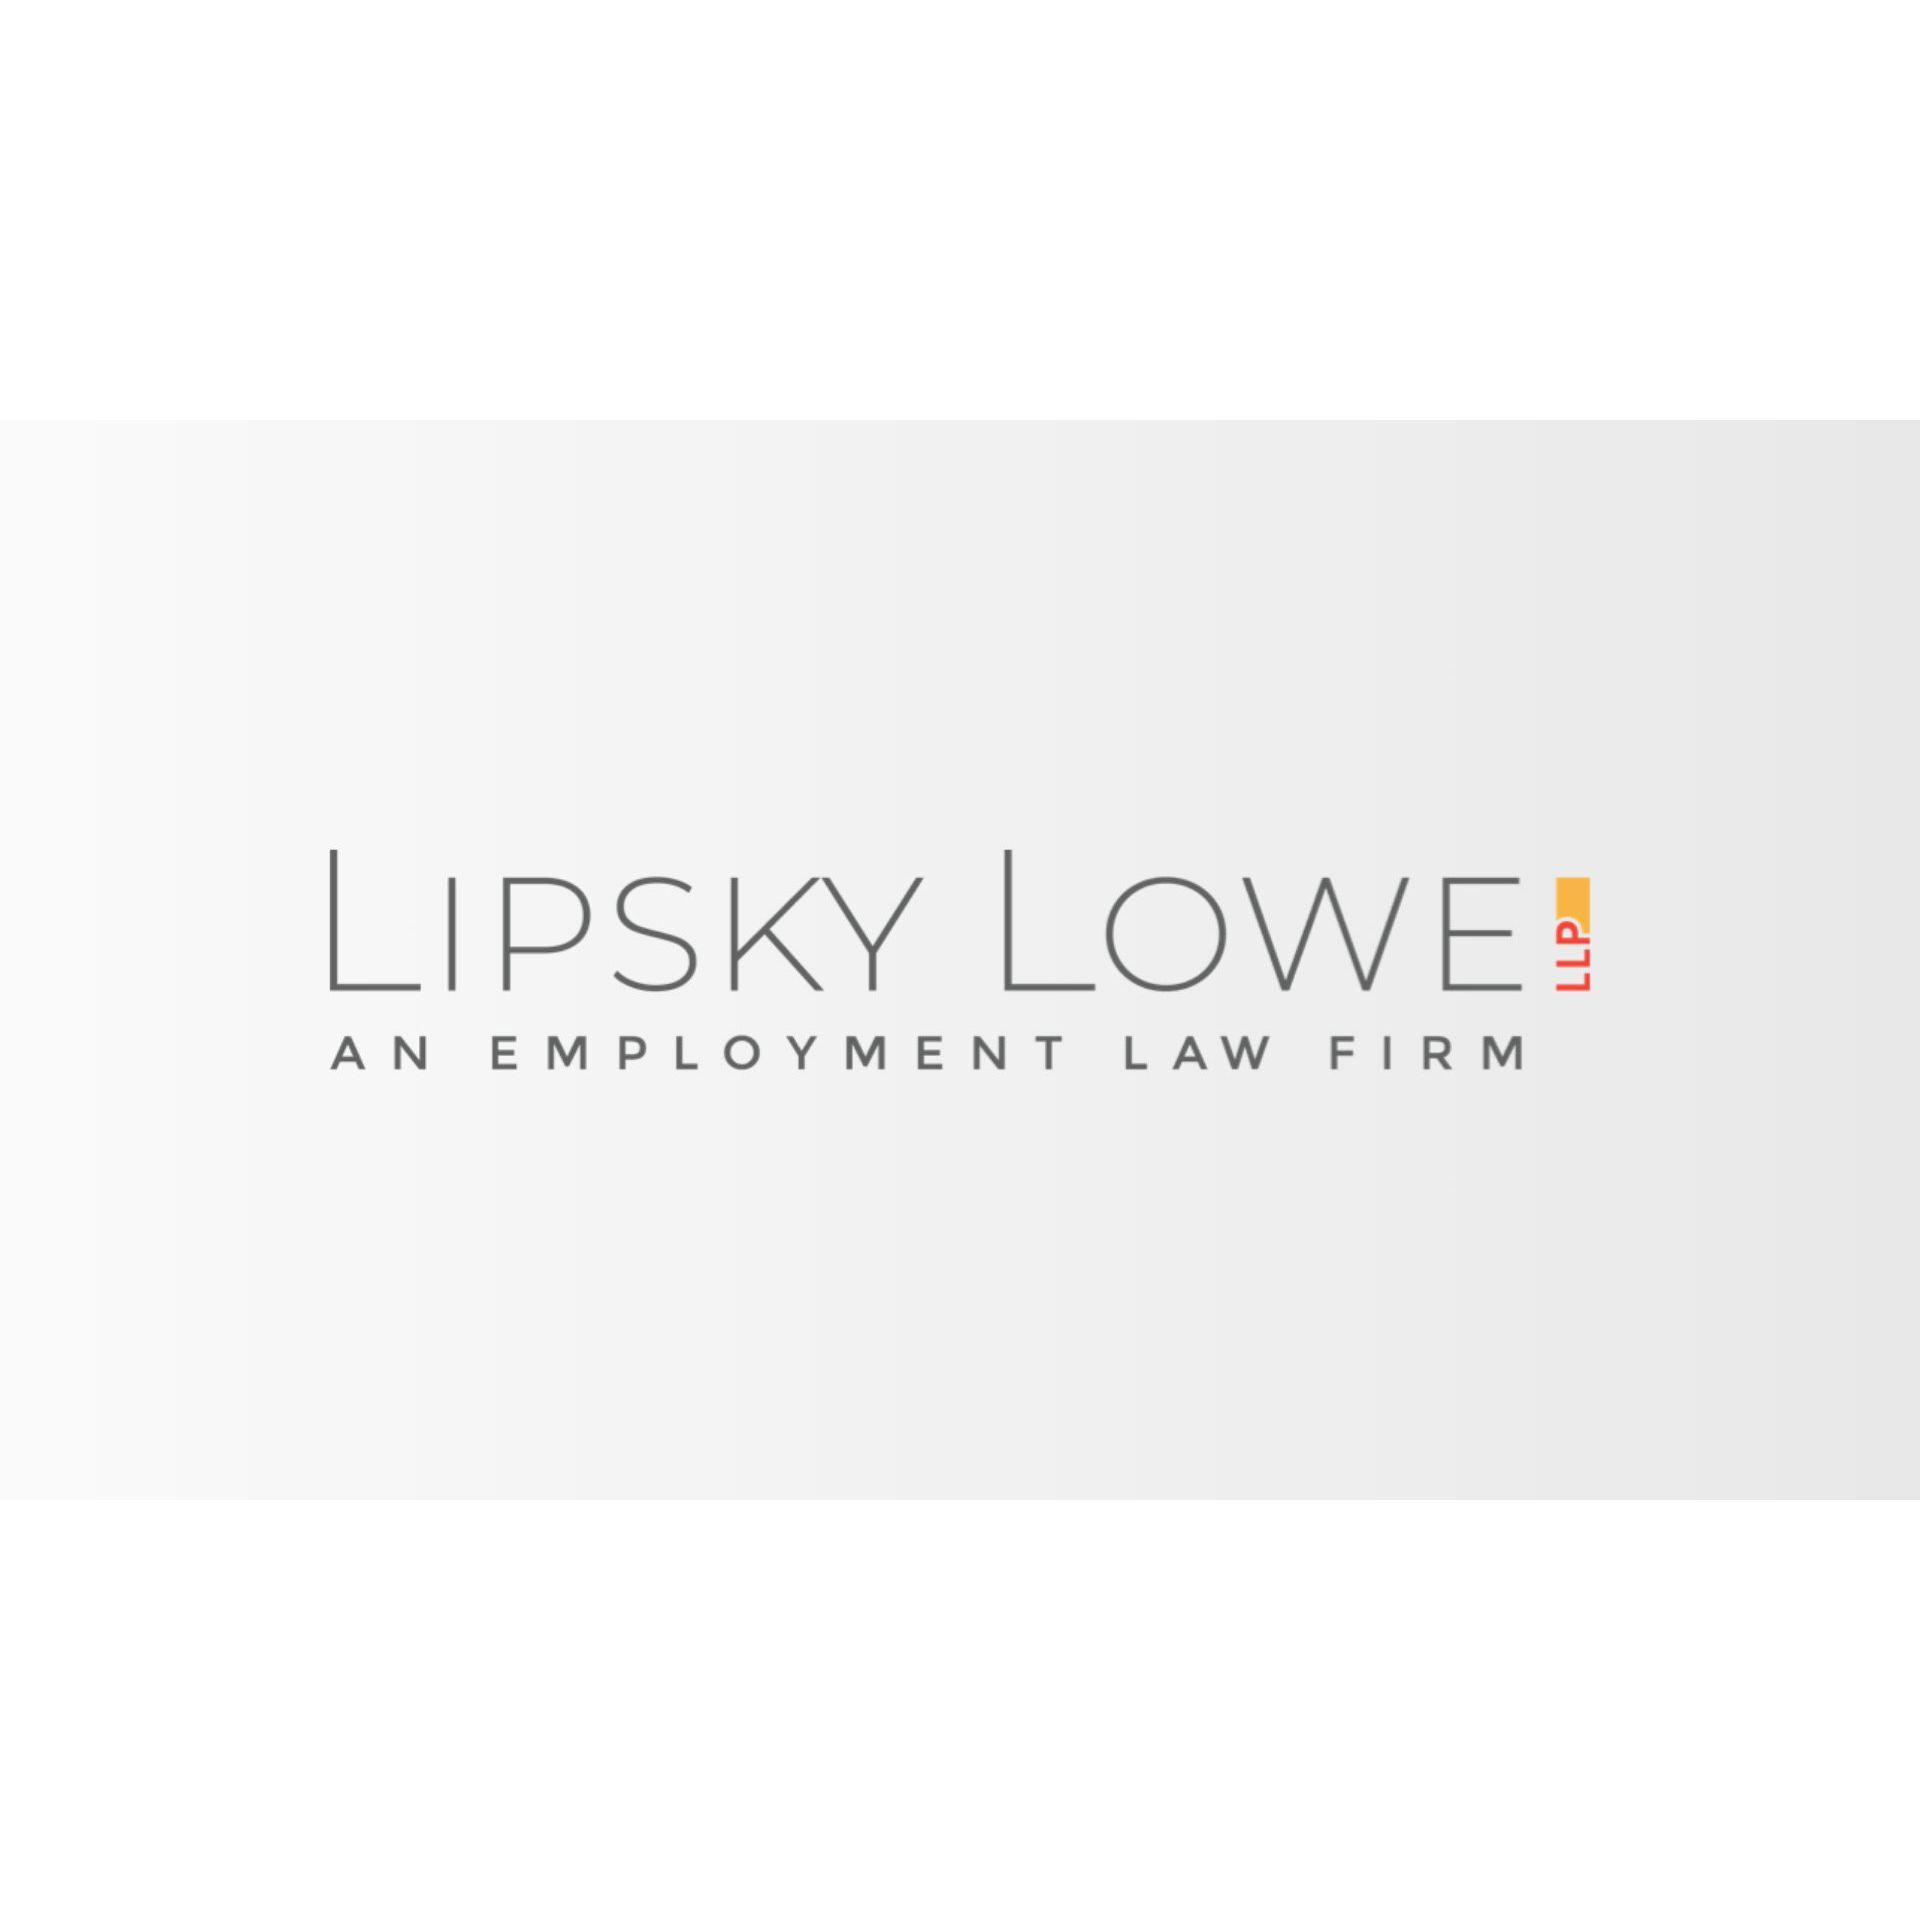 Lipsky Lowe Excited to Announce Milana Dostanitch’s Second Avvo Clients’ Choice Award - Law Firm Newswire